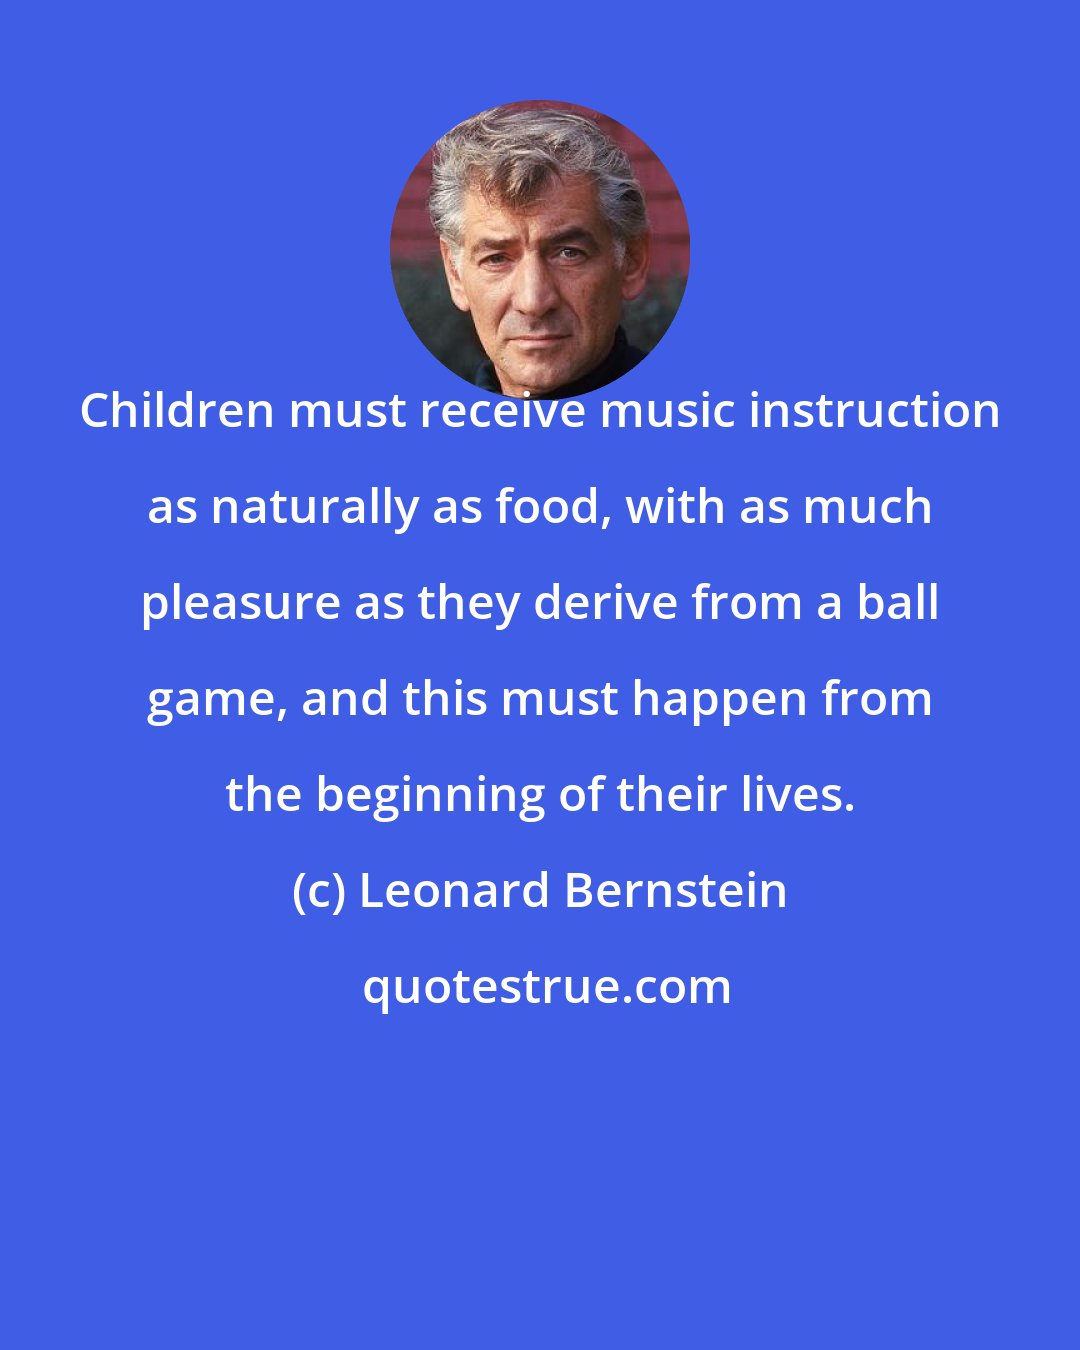 Leonard Bernstein: Children must receive music instruction as naturally as food, with as much pleasure as they derive from a ball game, and this must happen from the beginning of their lives.